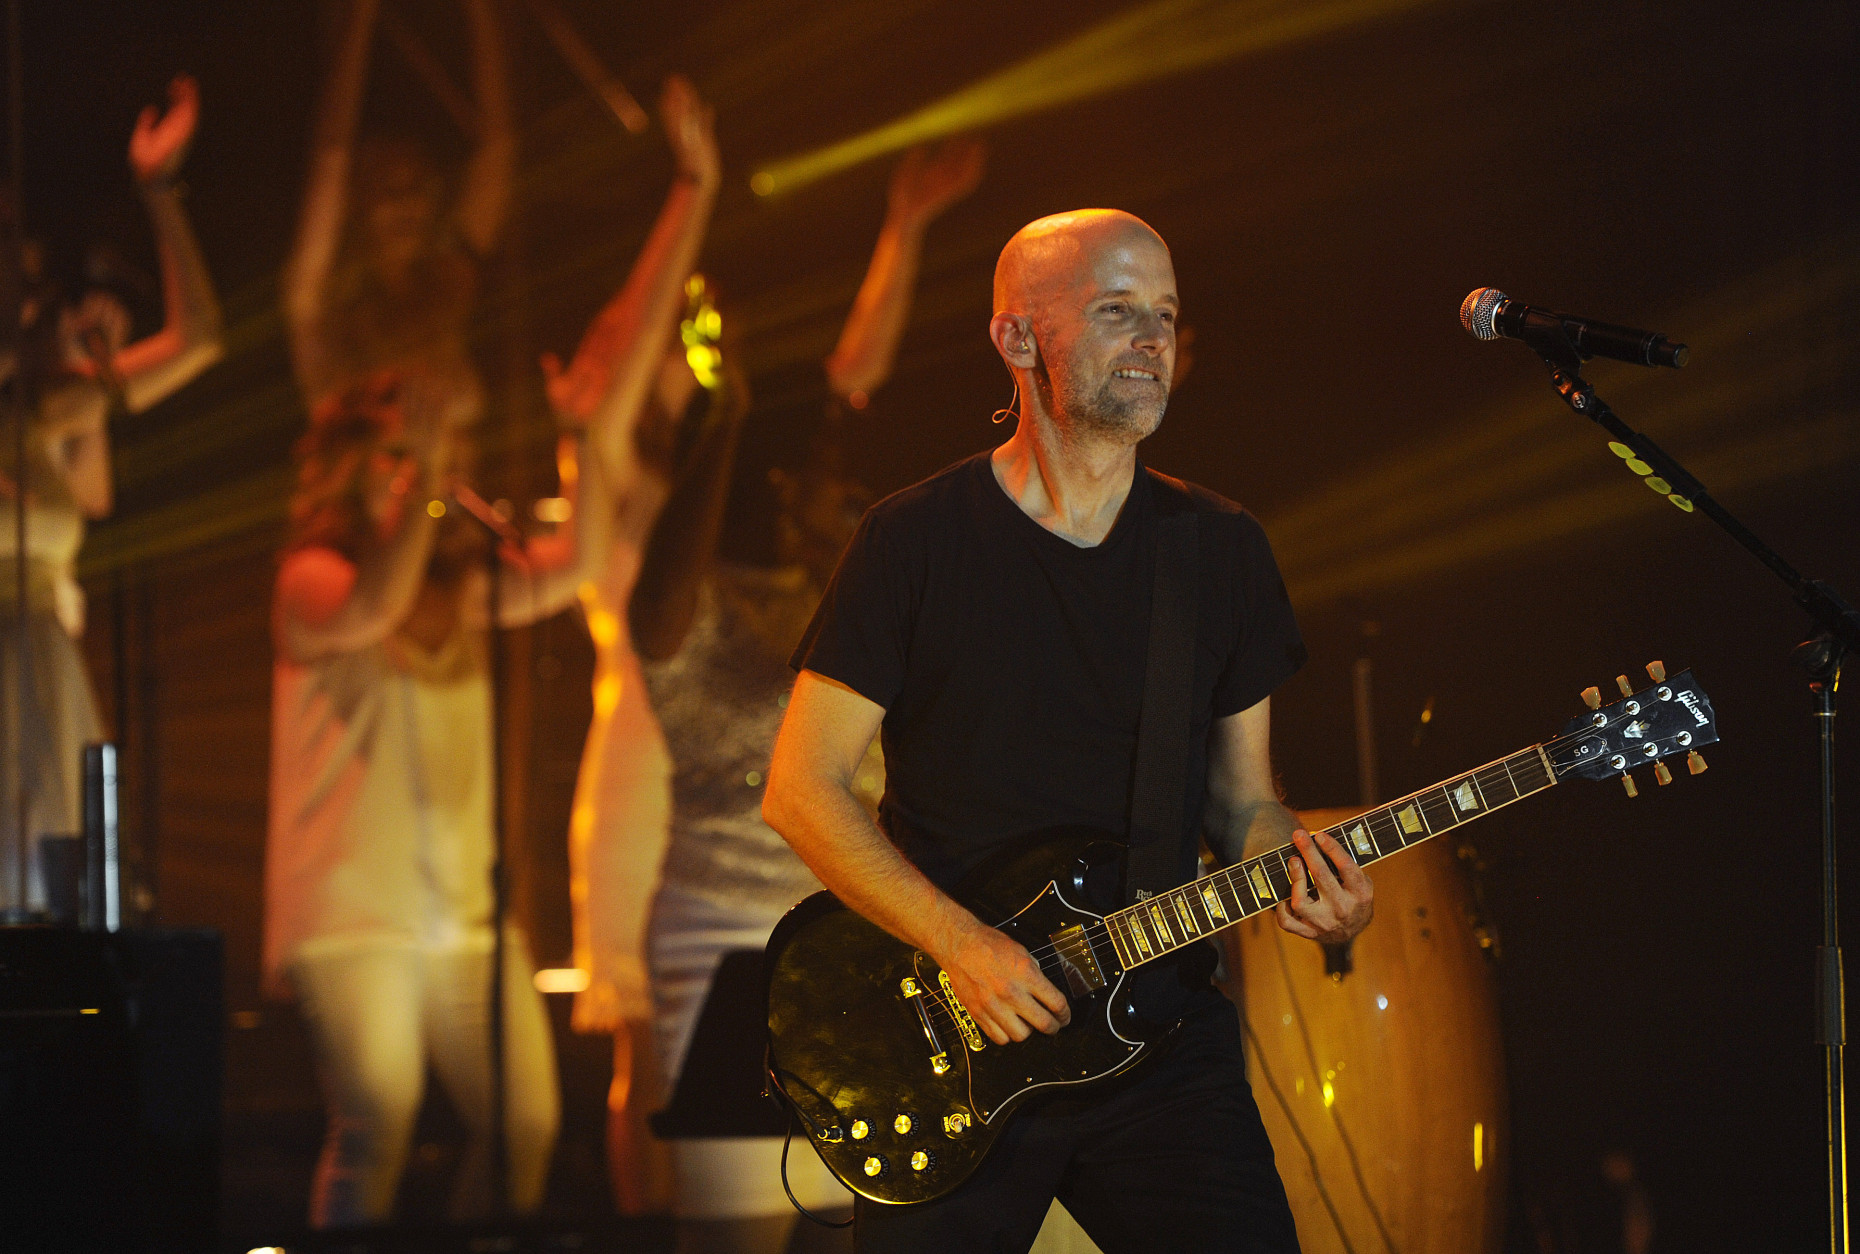 Moby performs with his band at The Fonda Theatre on Thursday, Oct. 3, 2013 in Los Angeles. (Photo by Chris Pizzello/Invision/AP)